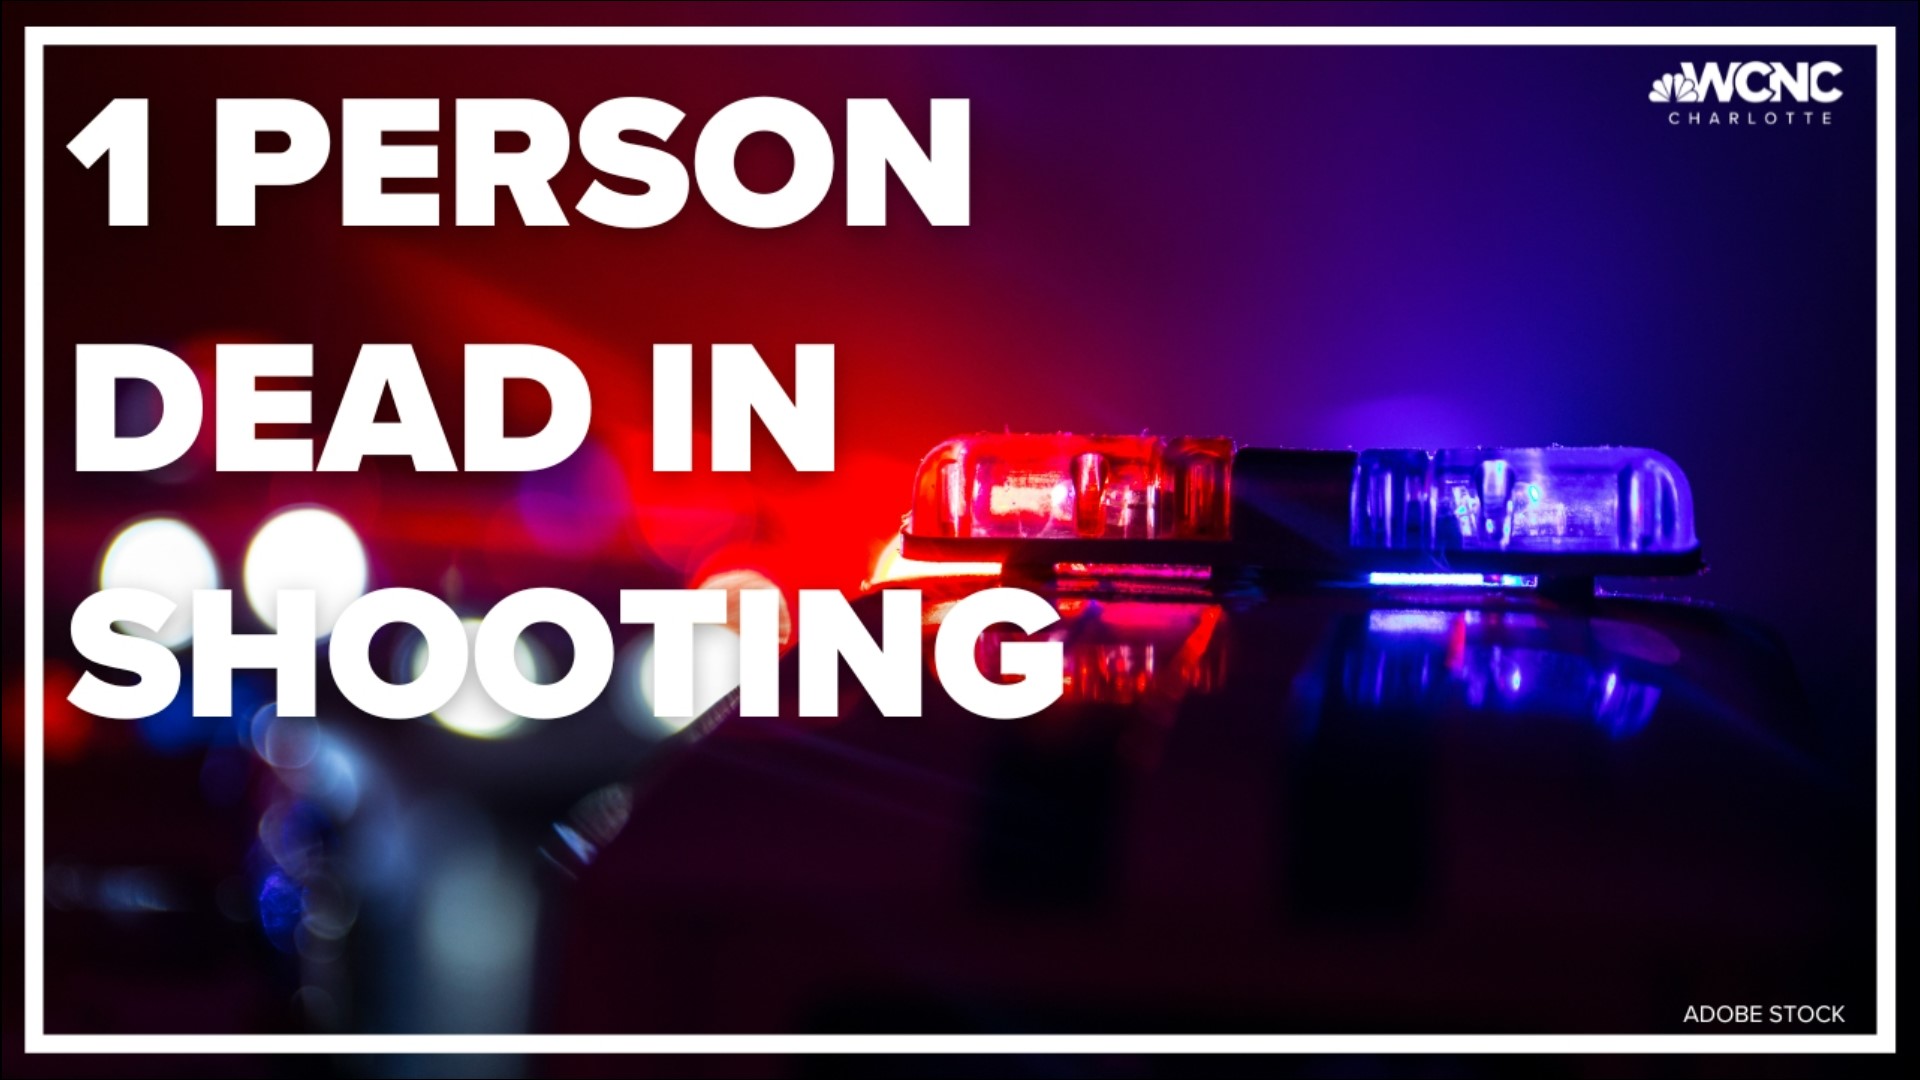 Police are investigating this fatal shooting.